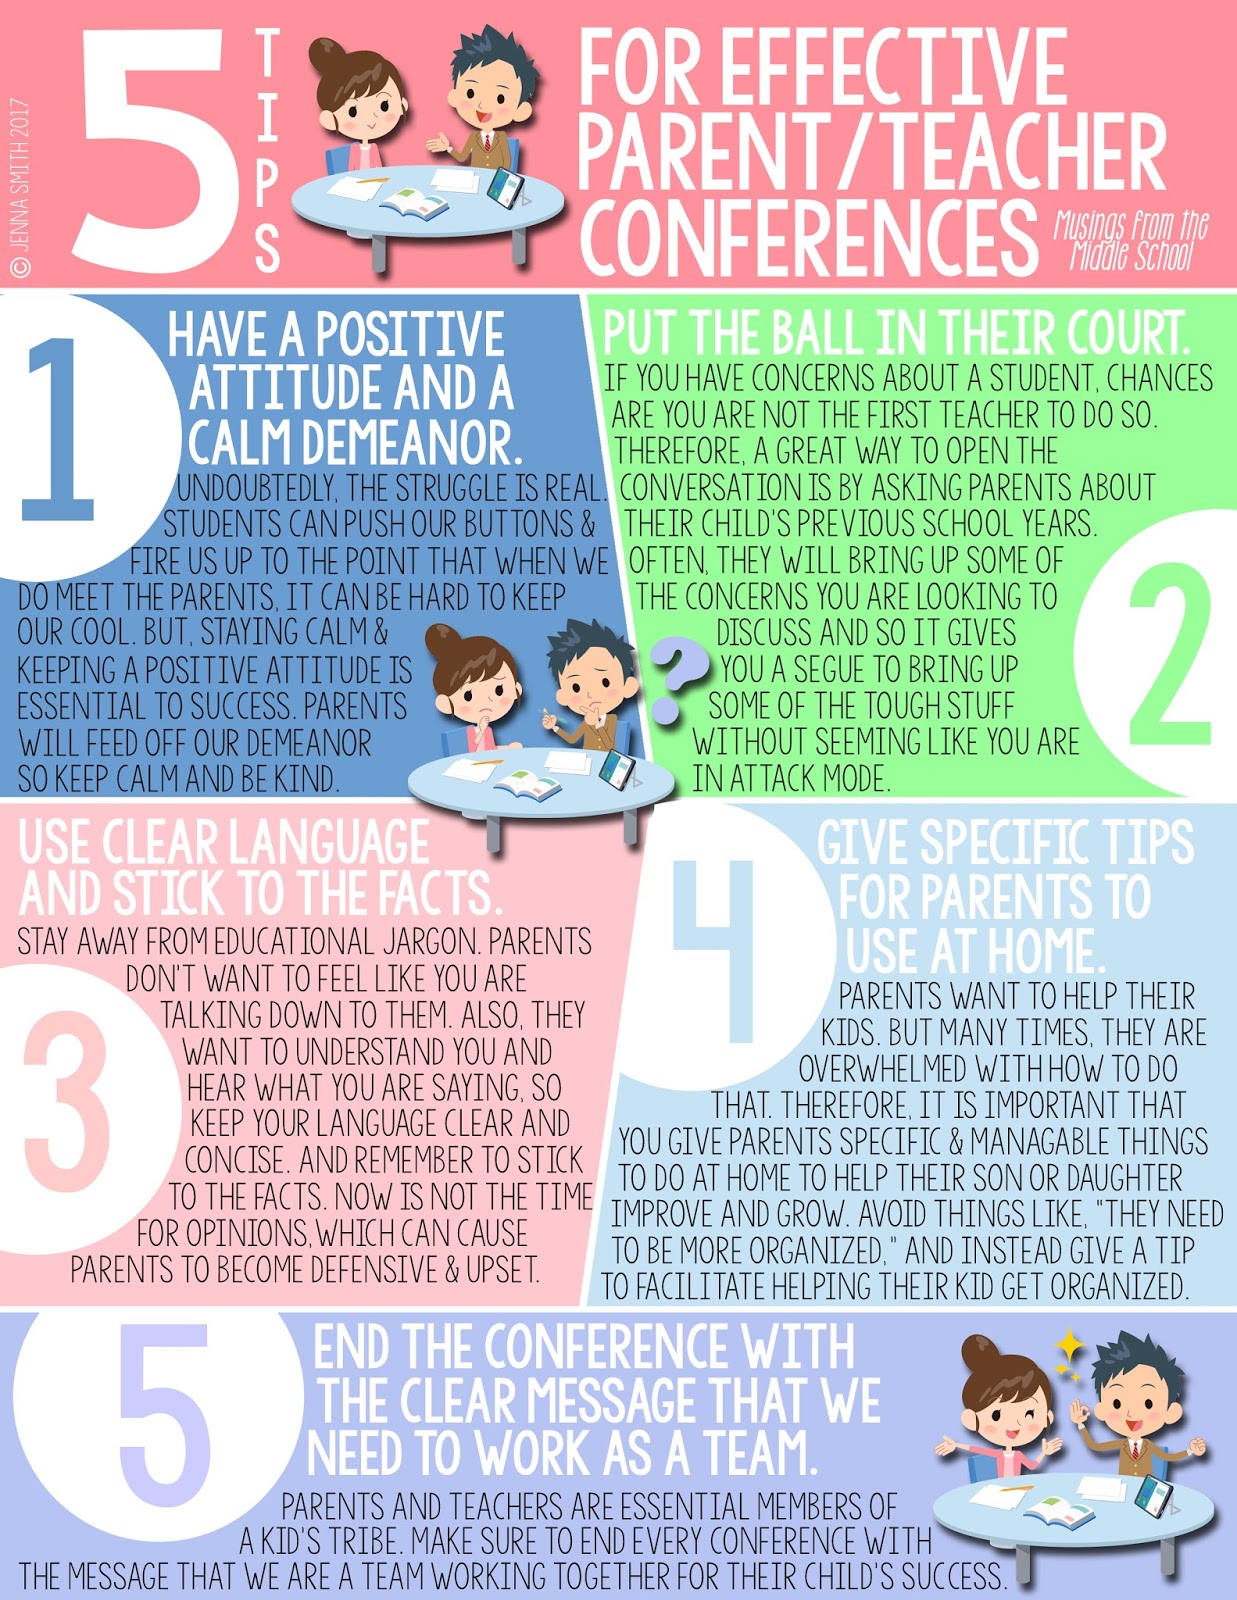 5 Tips for Effective Parent/Teacher Conferences Musing From The